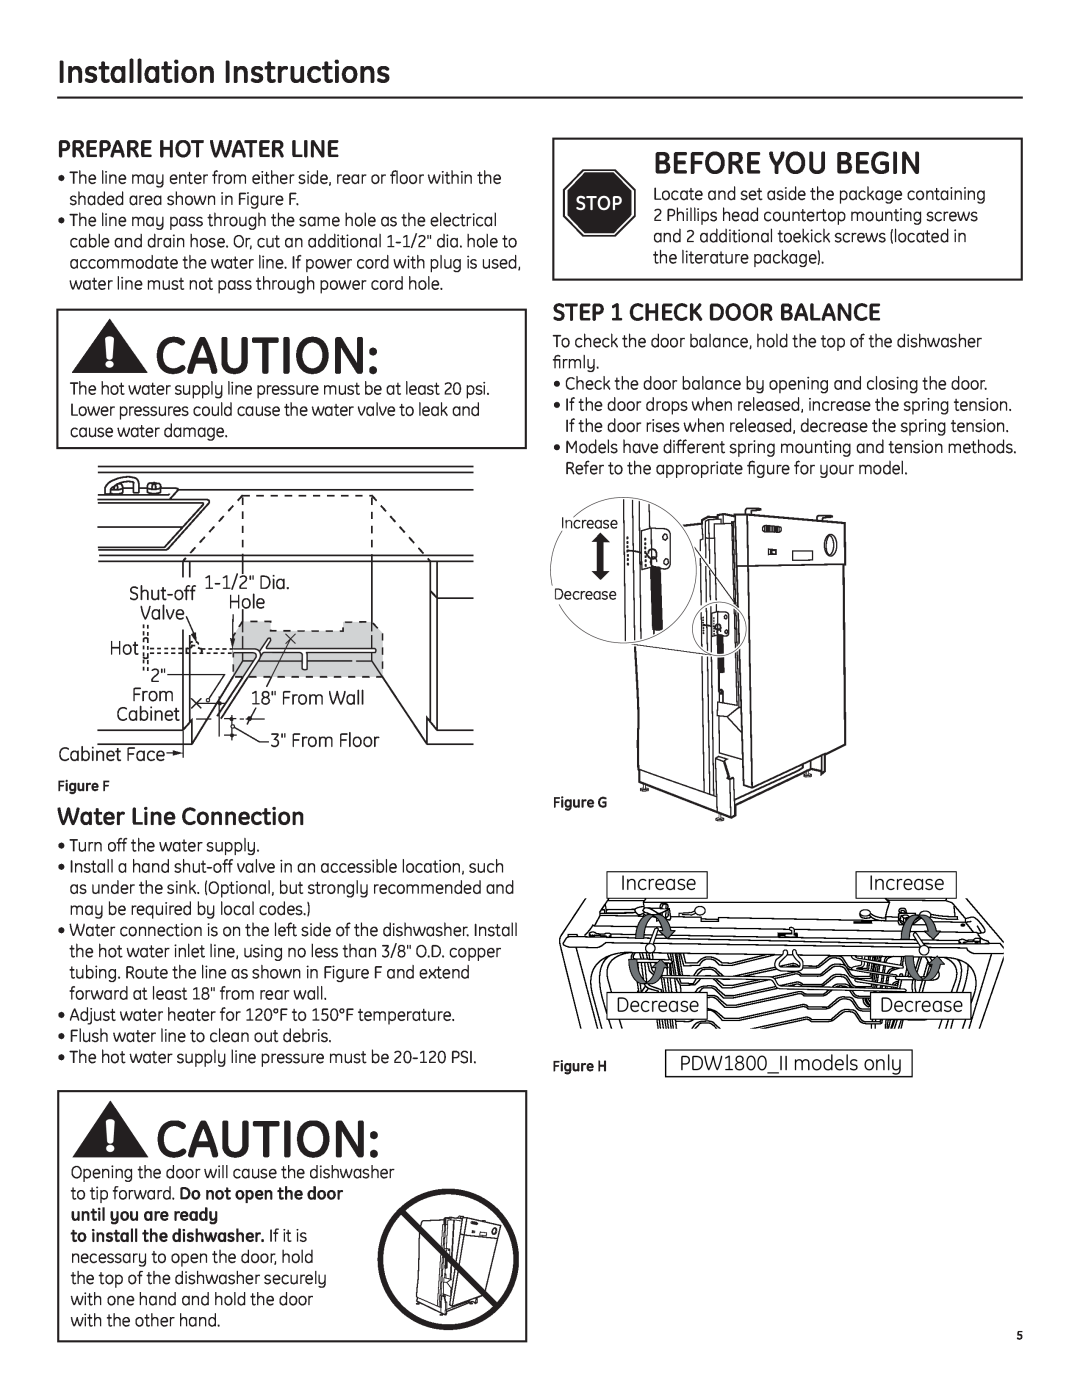 GE Built-In Dishwasher Installation Instructions, Prepare Hot Water Line, Check Door Balance, Water Line Connection, Stop 